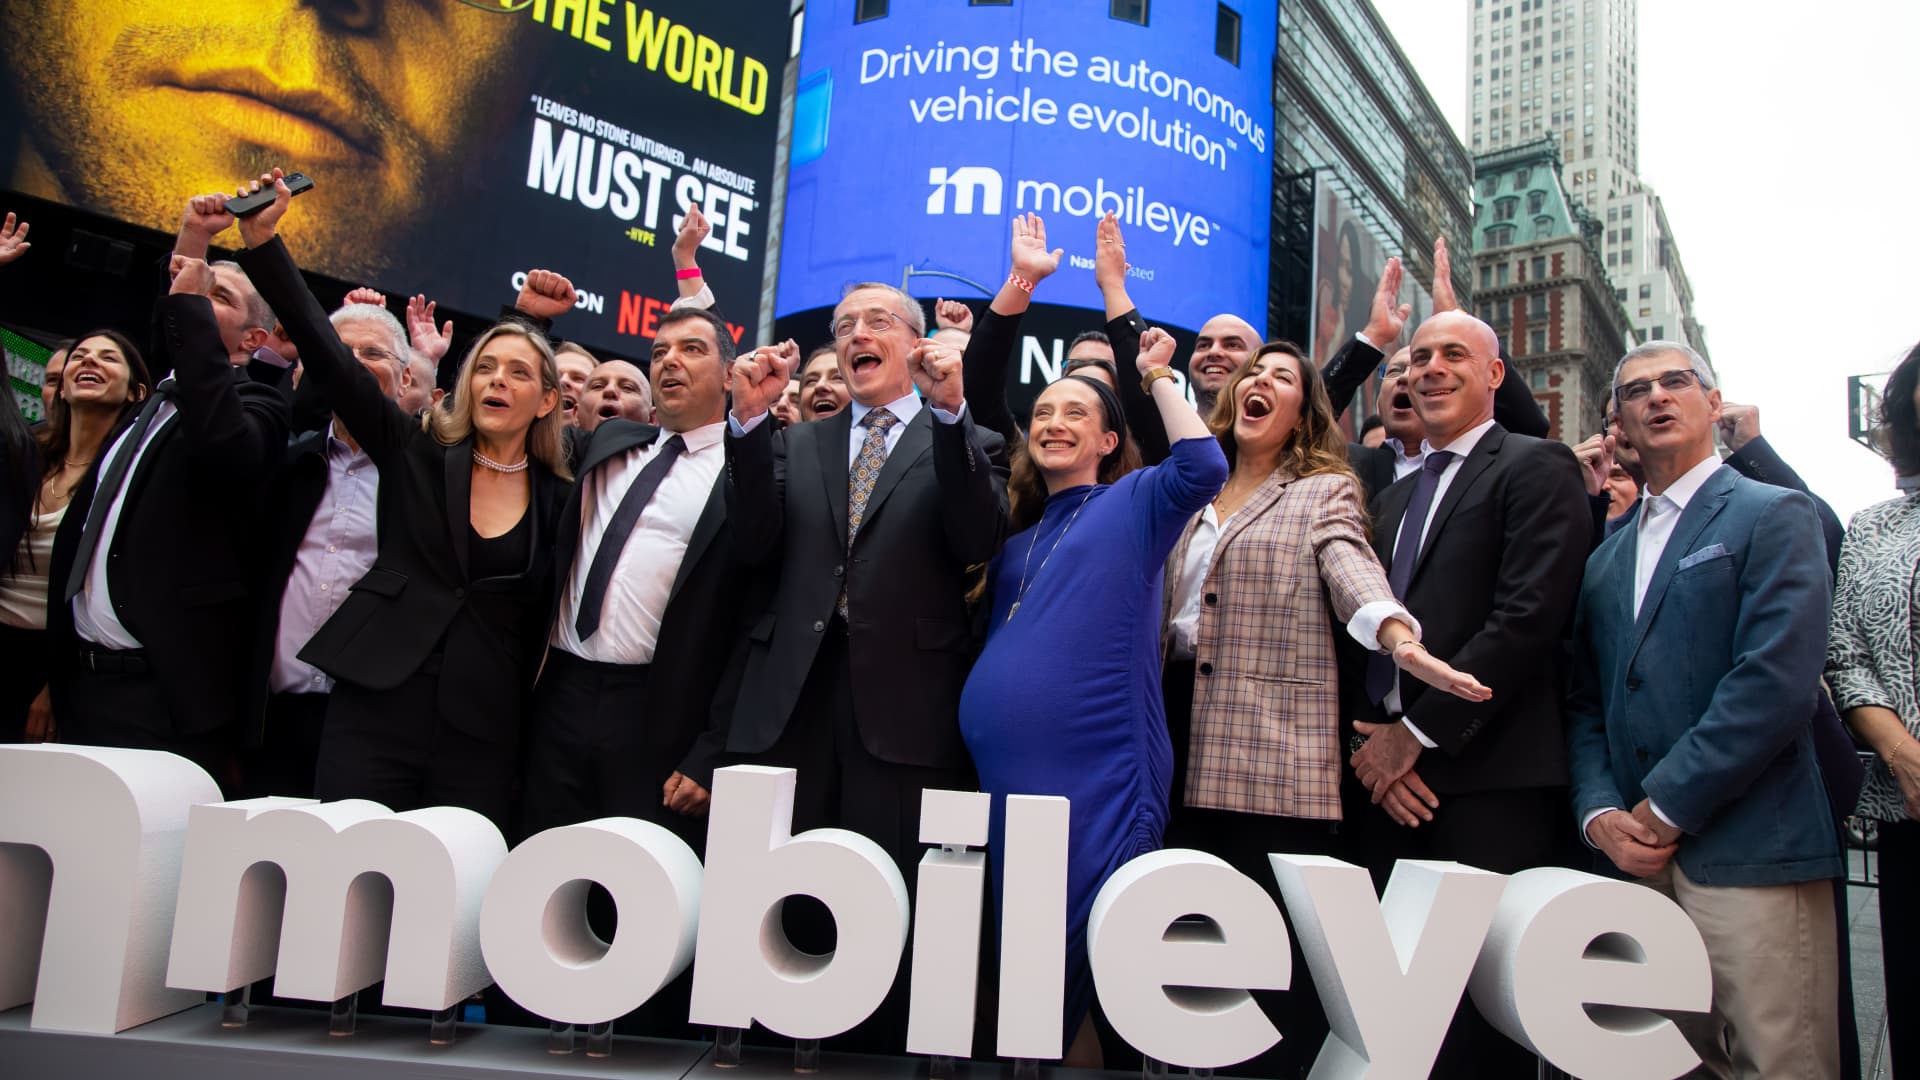 Mobileye pops more than 37{a78e43caf781a4748142ac77894e52b42fd2247cba0219deedaee5032d61bfc9} in IPO after spinning out of Intel